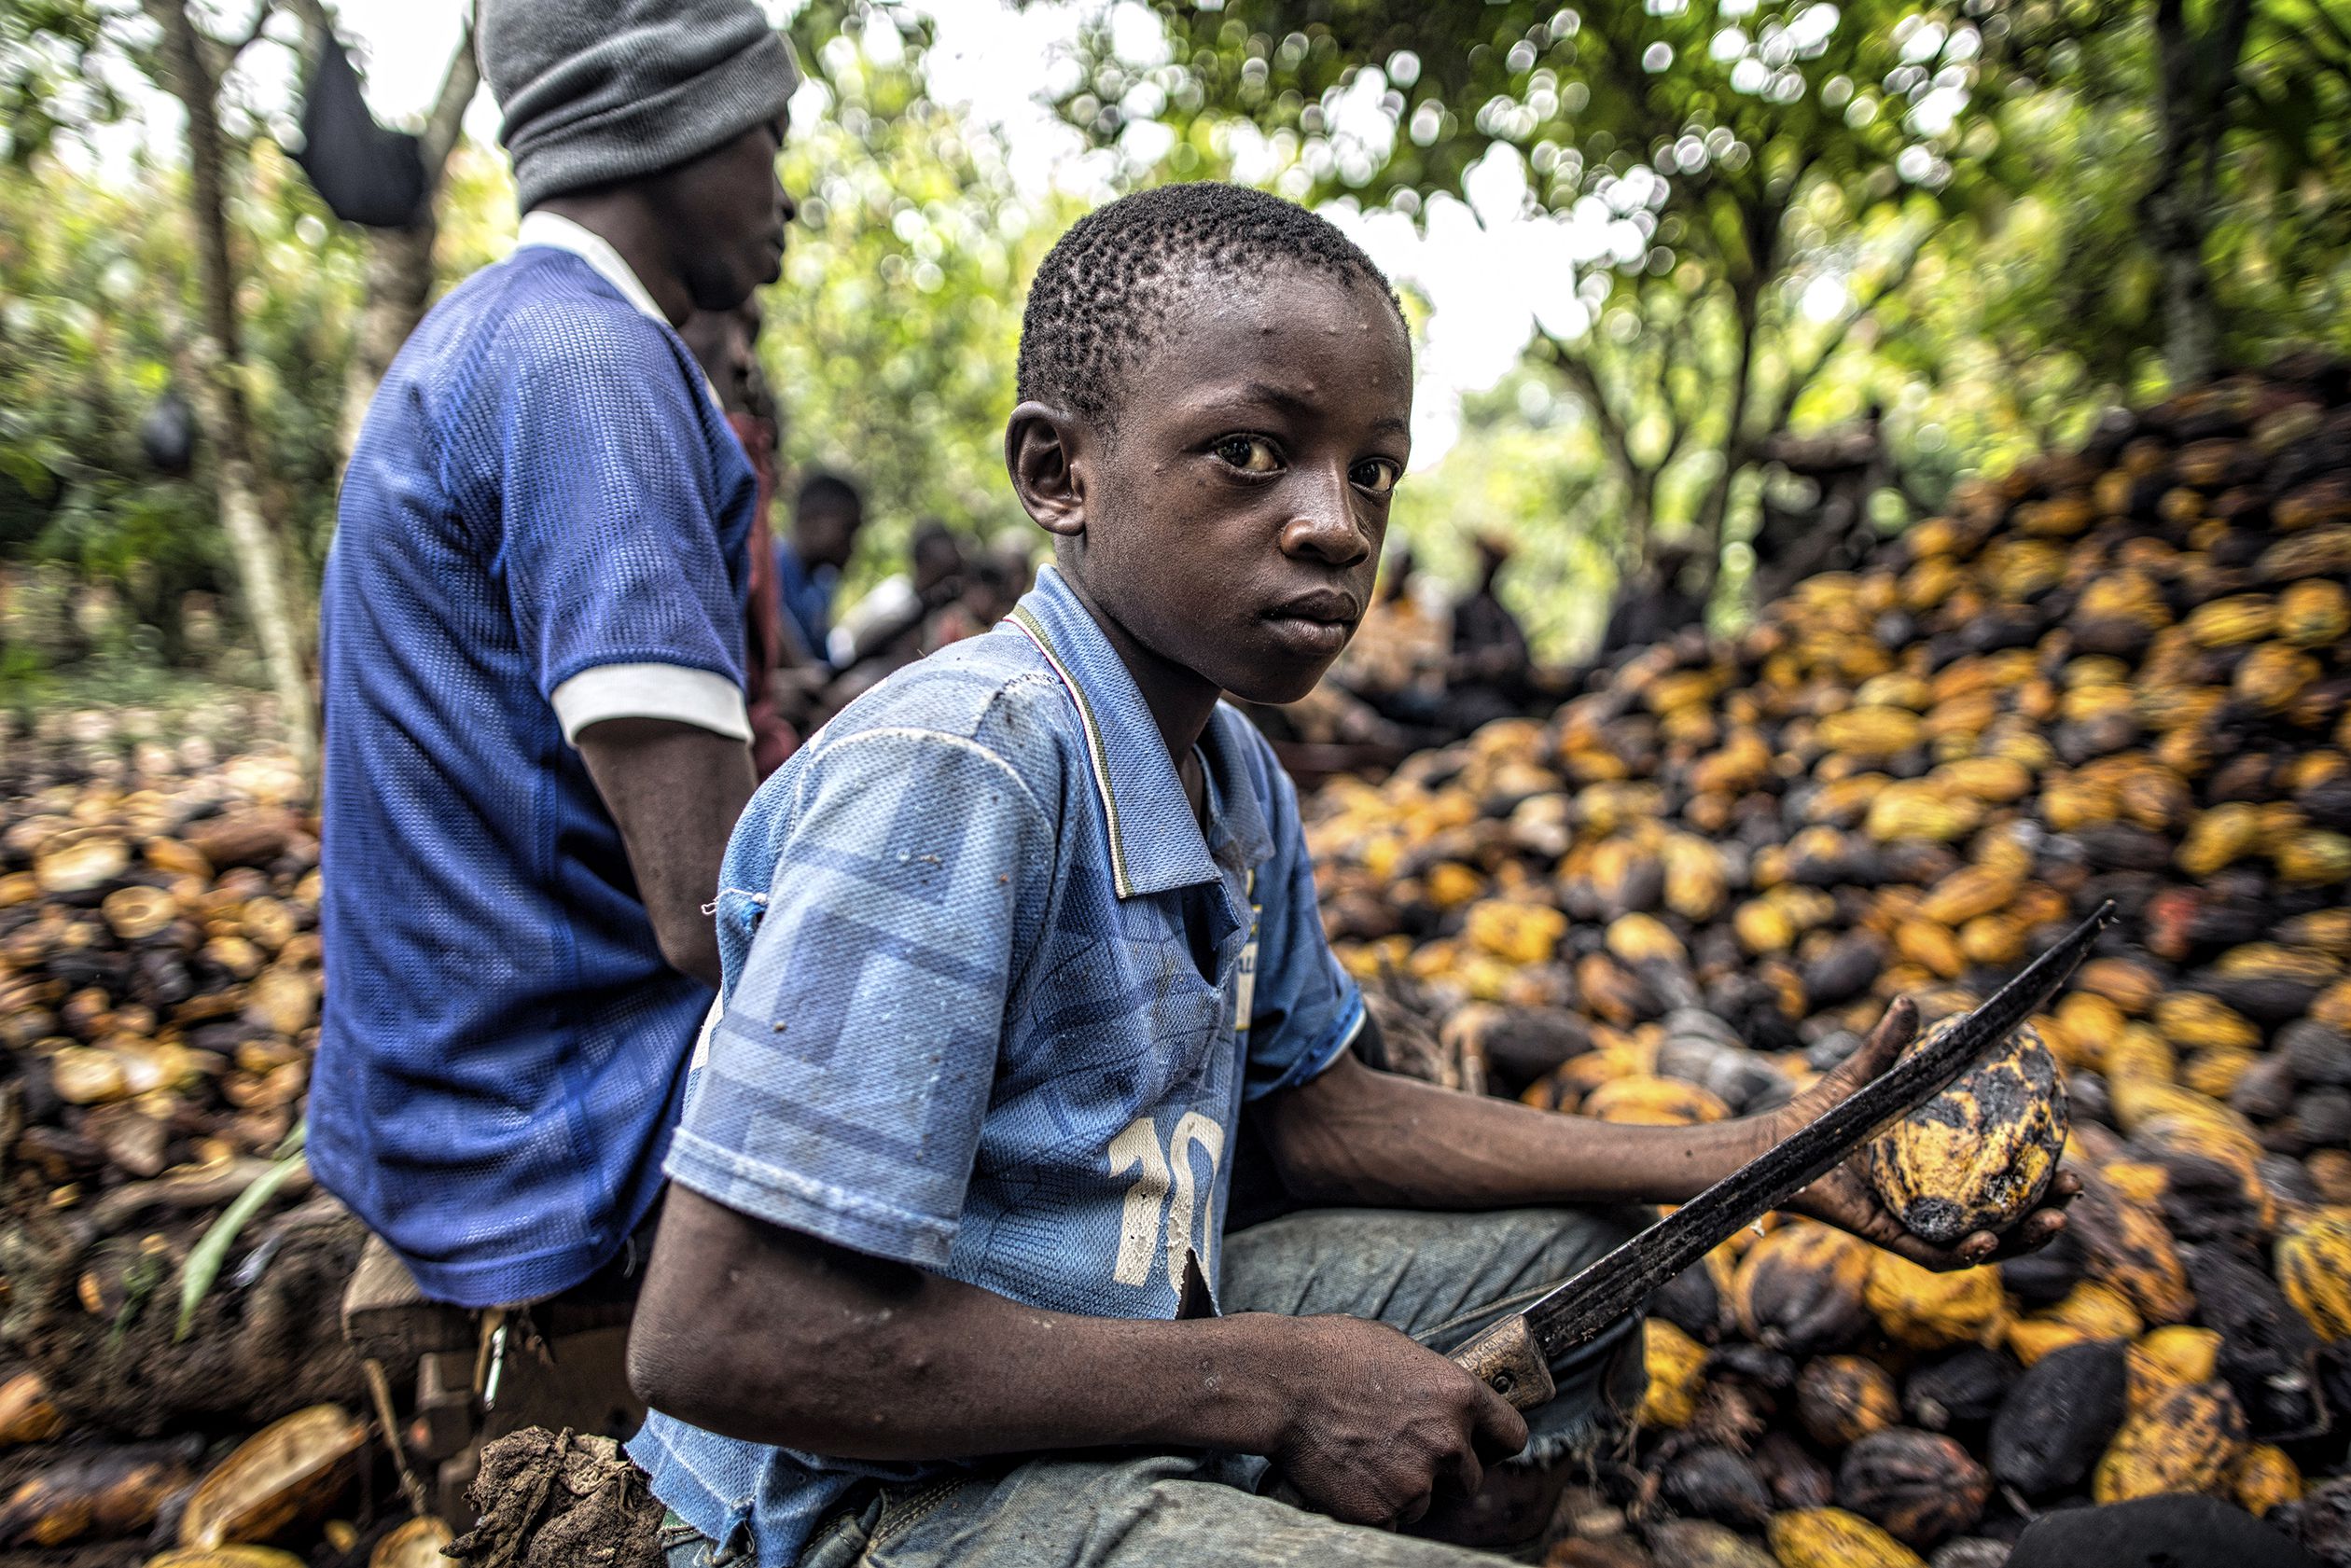 Farmers Urge FG To Initiate Plans To Boost Cocoa Production